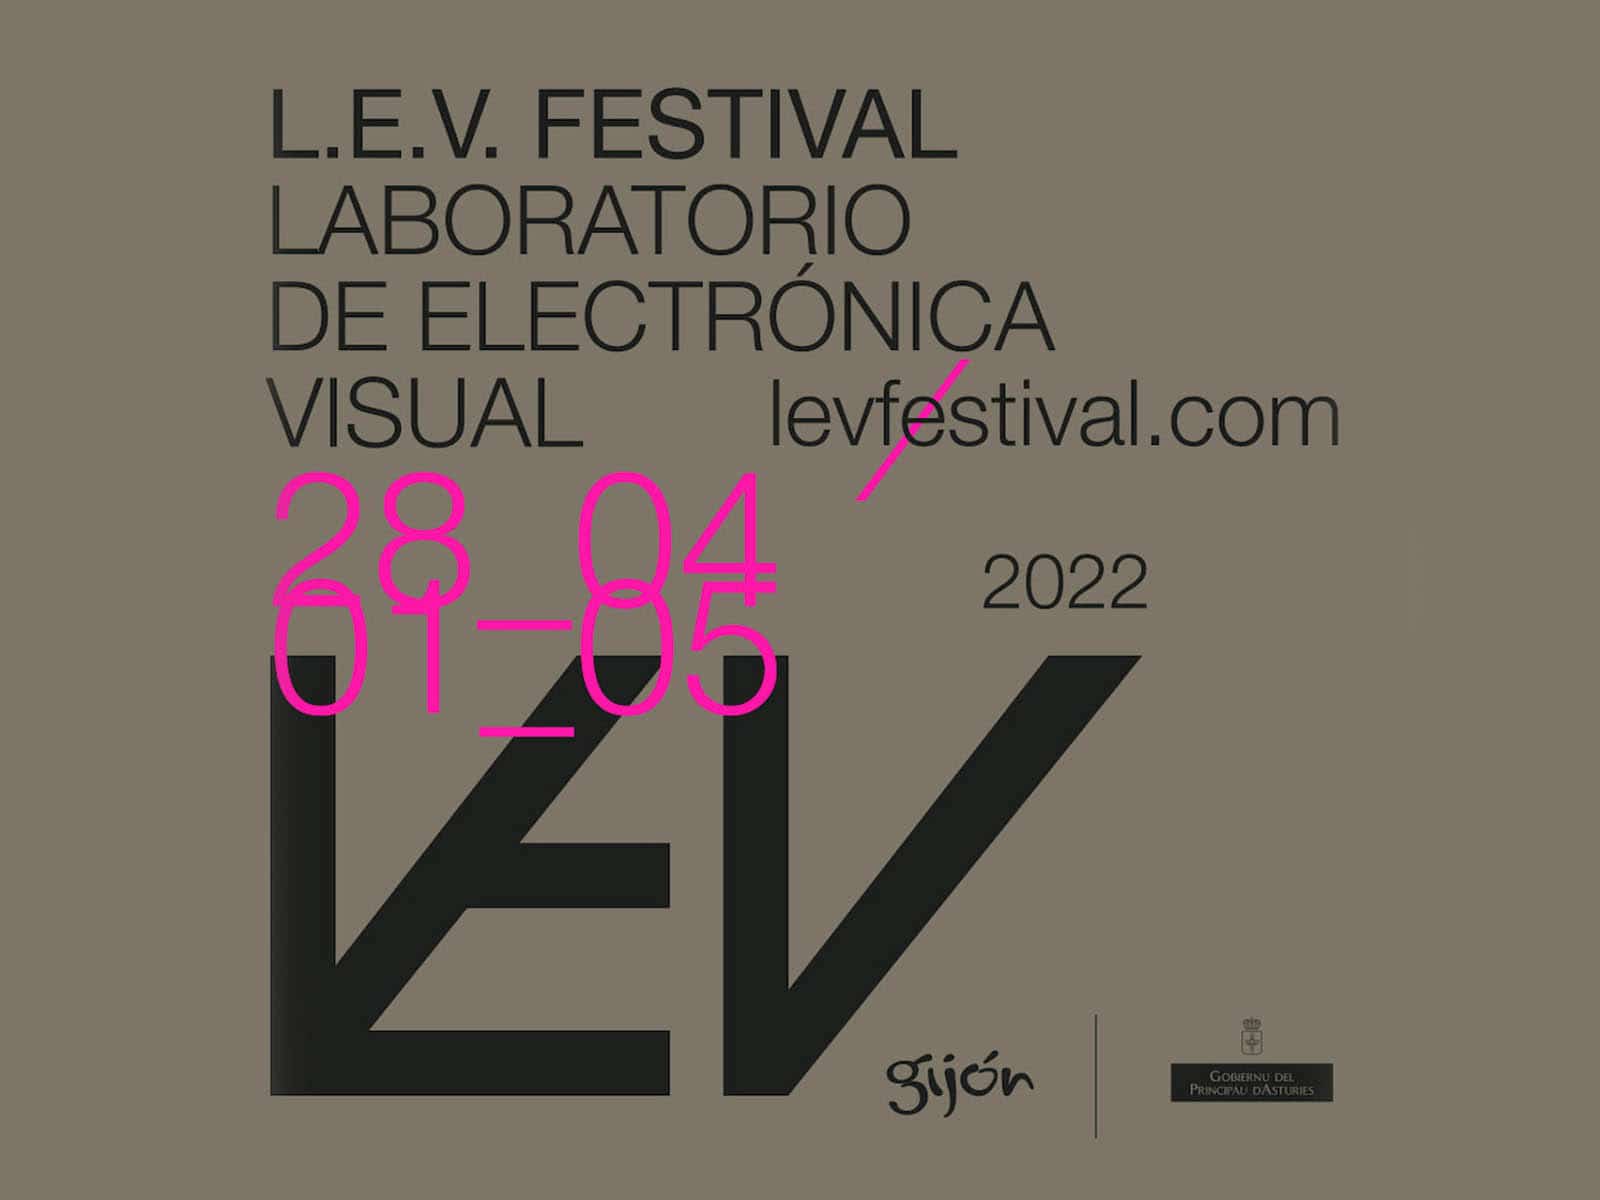 The 16th edition of L.E.V Festival is back: the laboratory of visual electronics